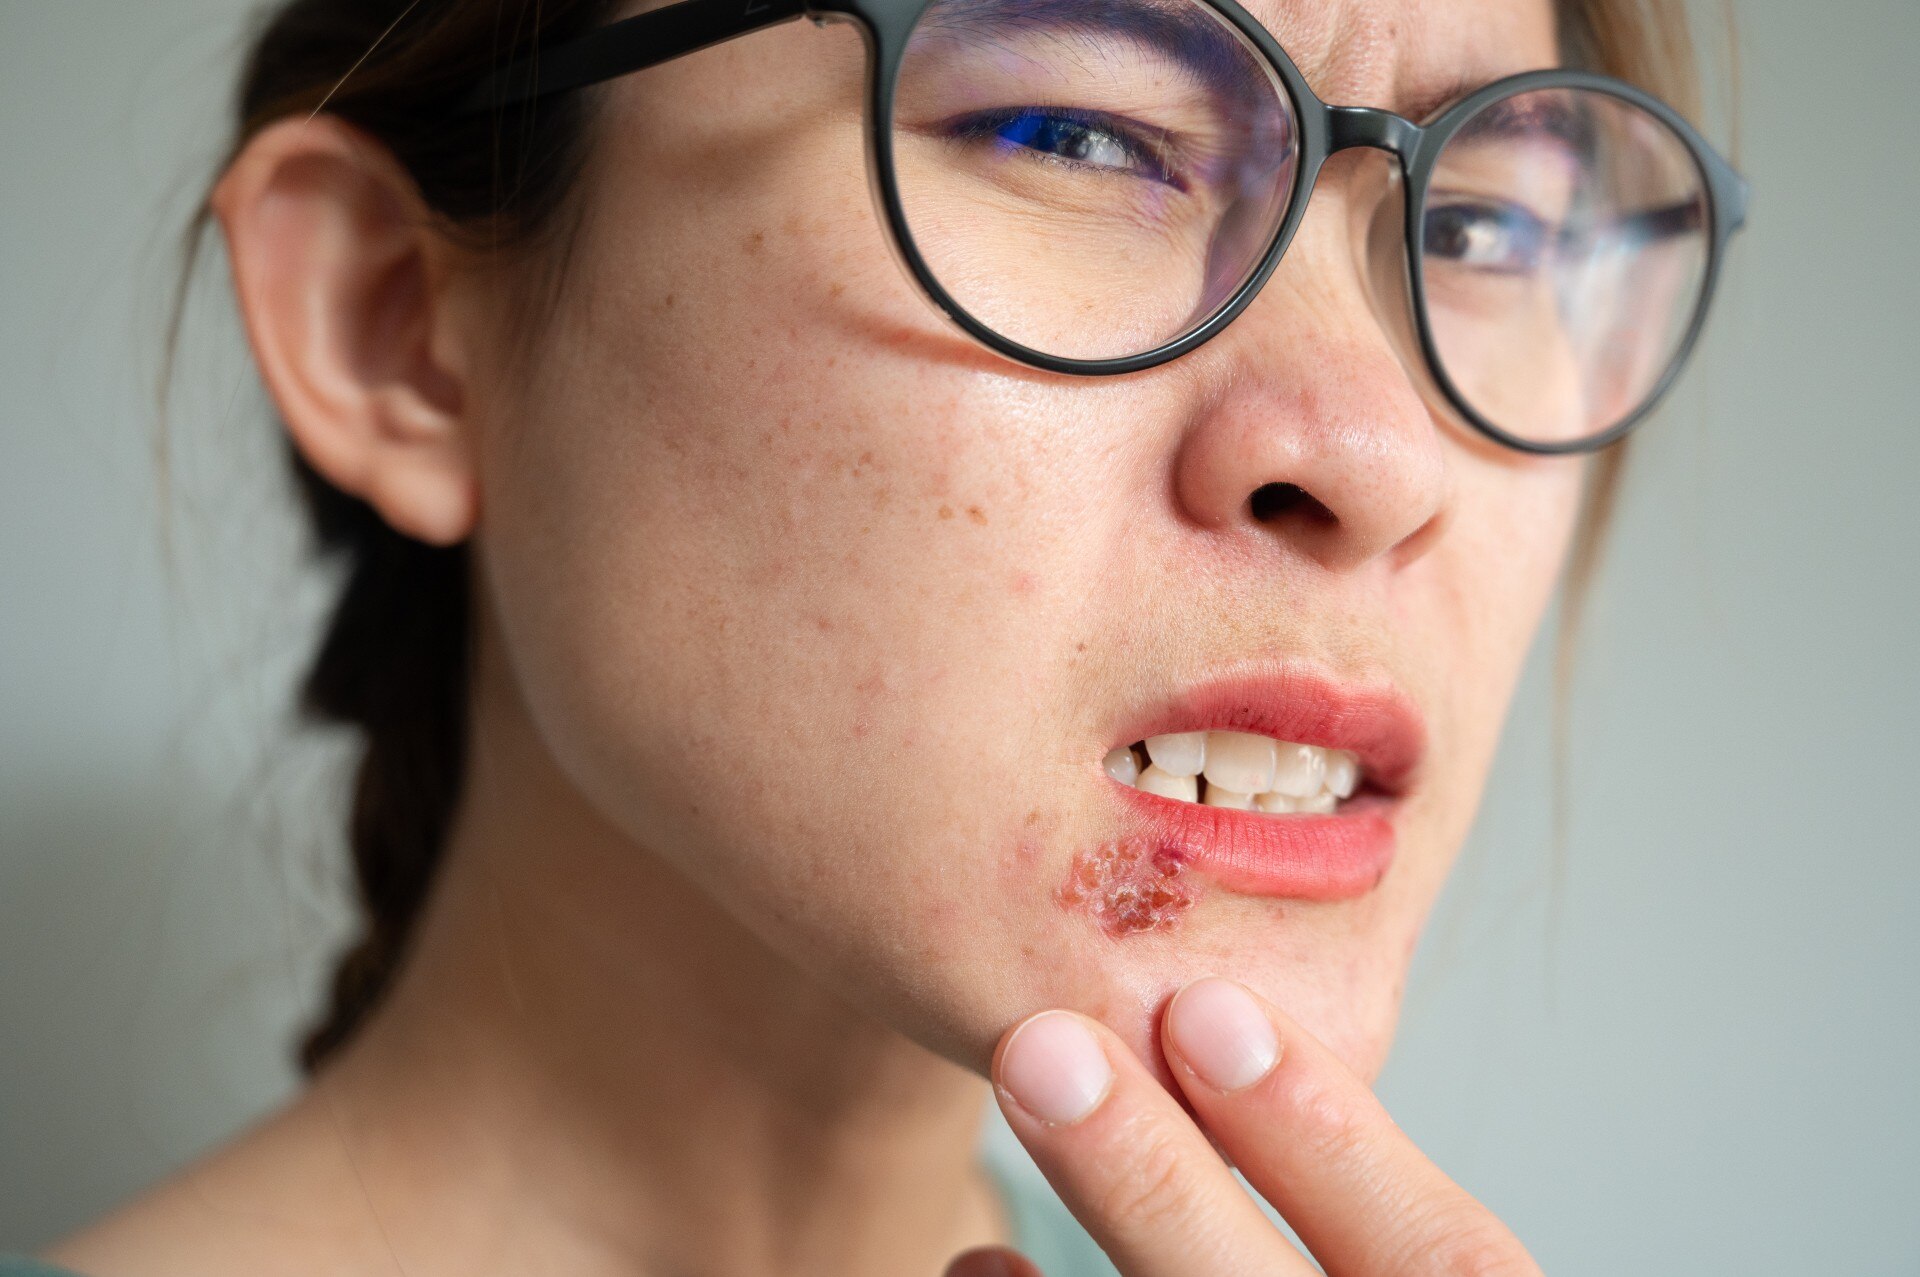 A woman with glasses and a small, scabby sore on her lower lip